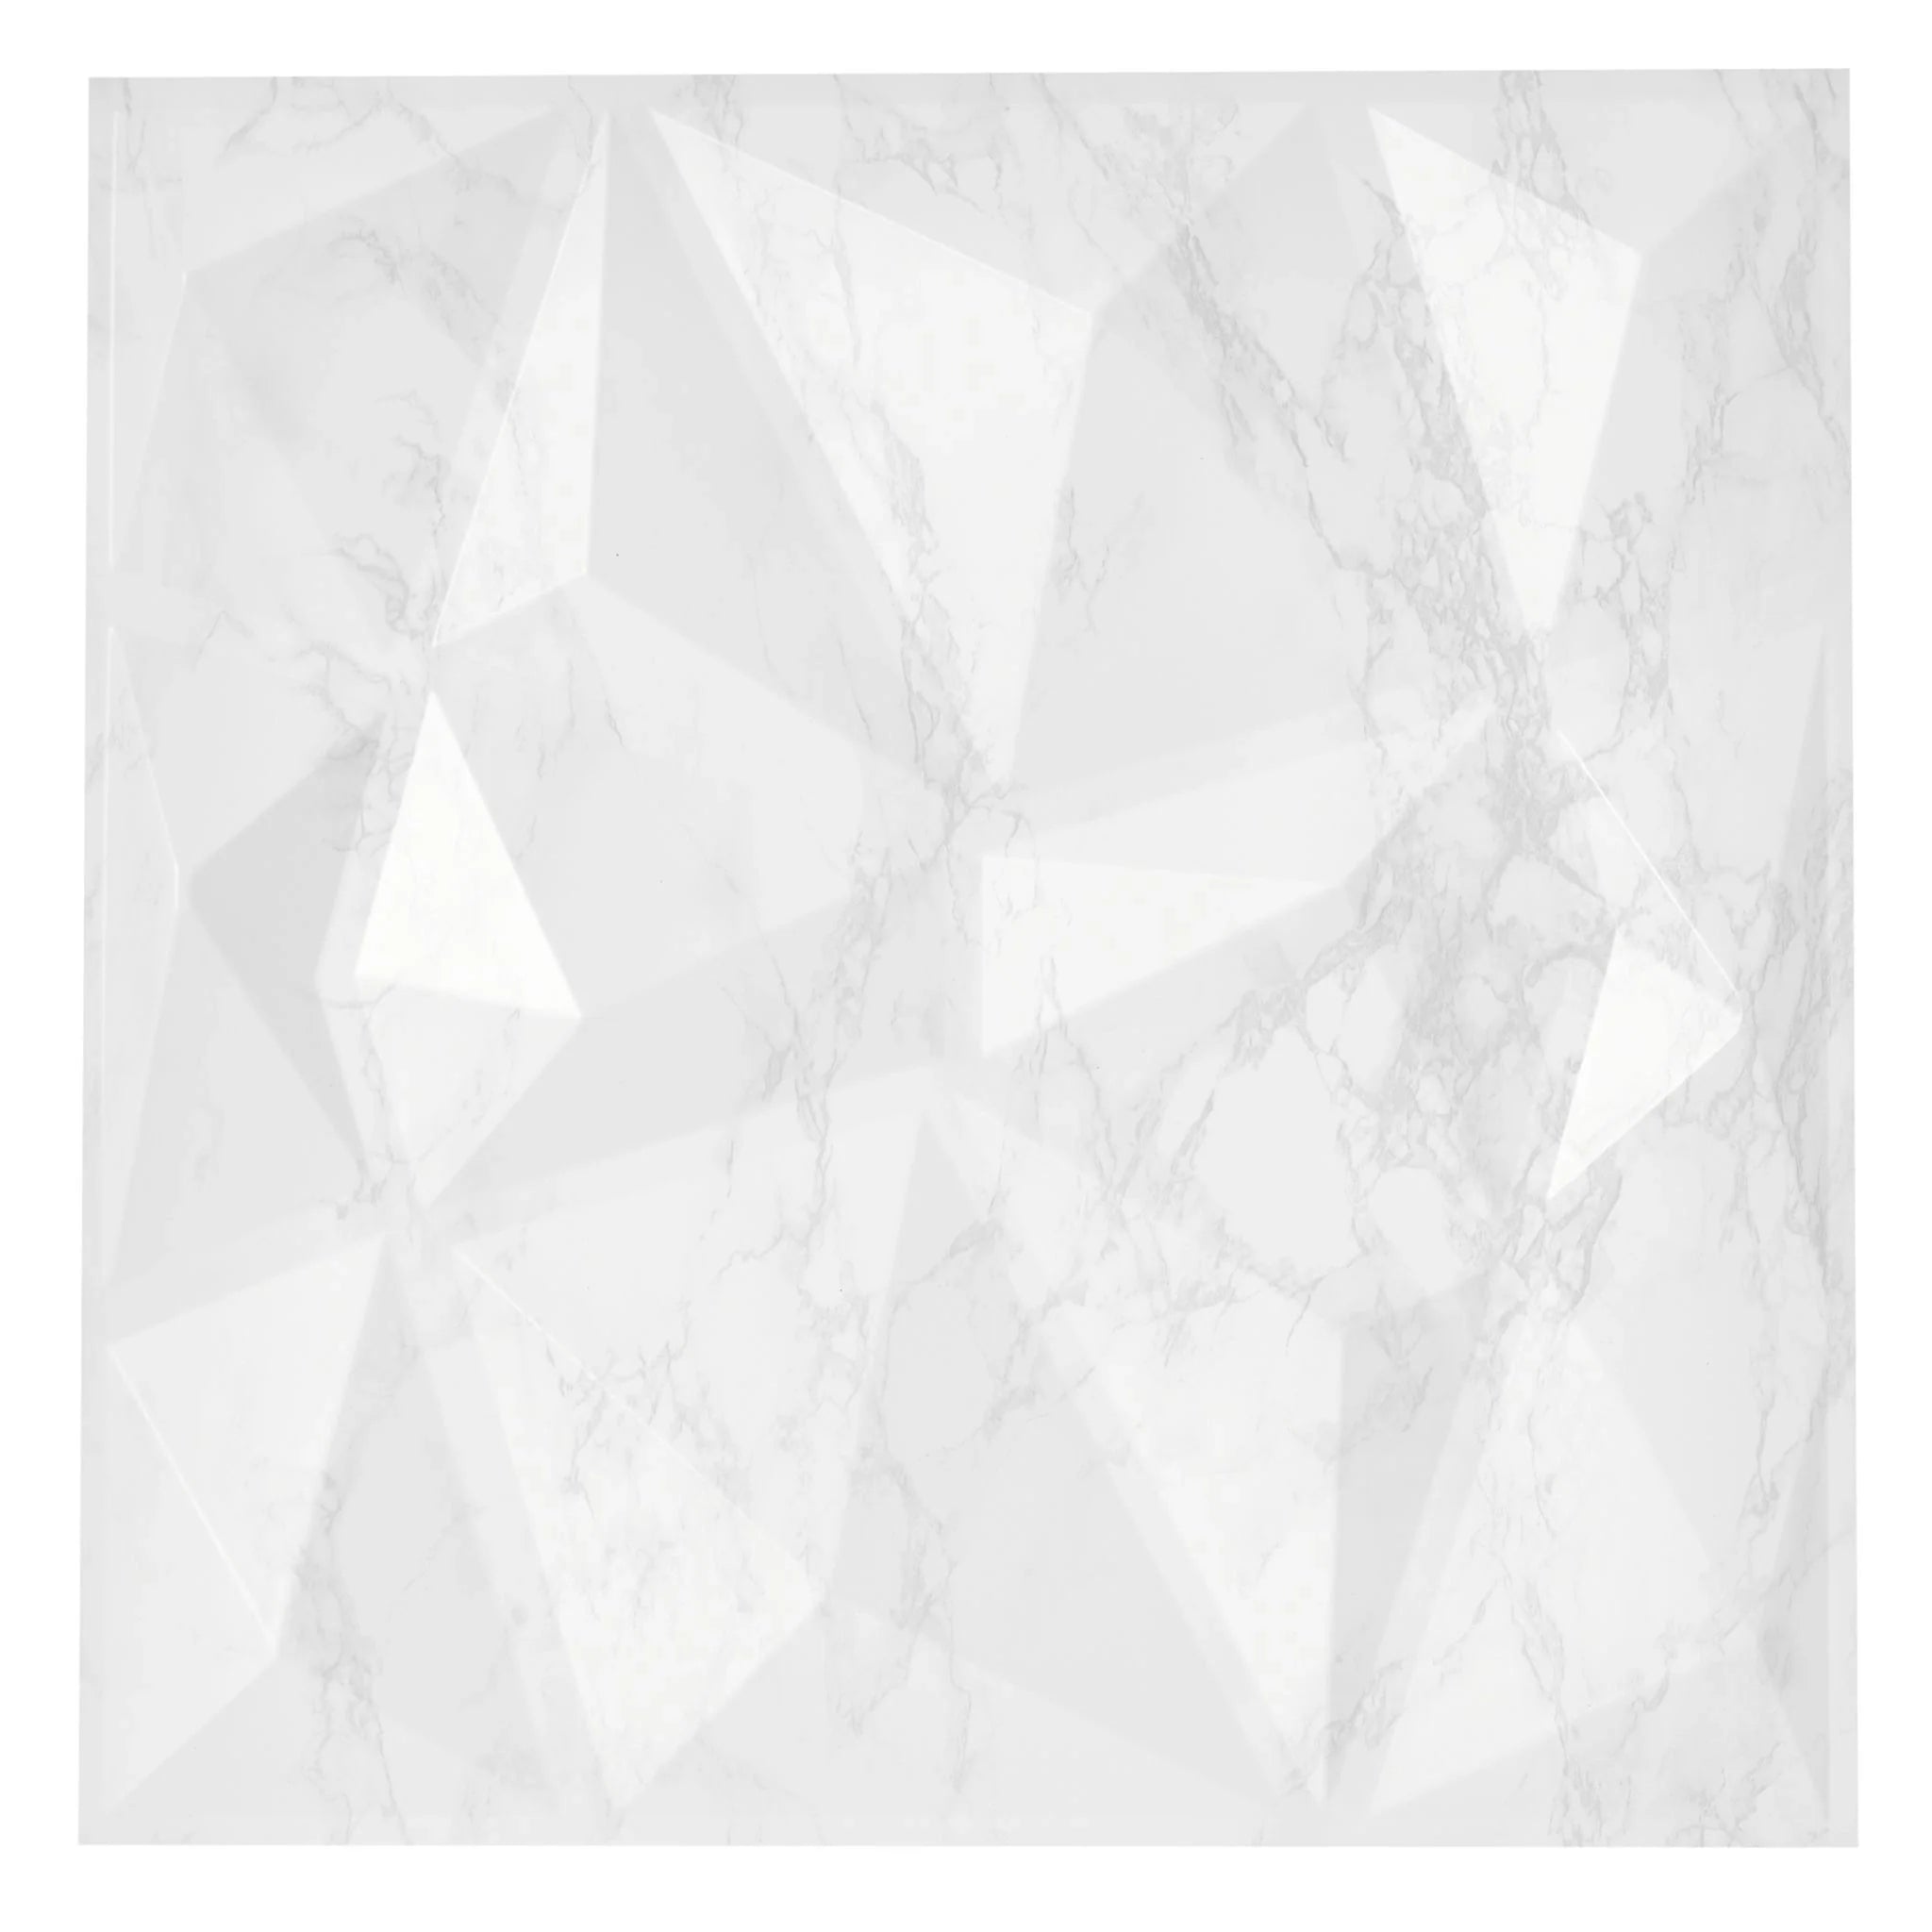 Marble PVC wall panel with geometric design, 50x50 cm size